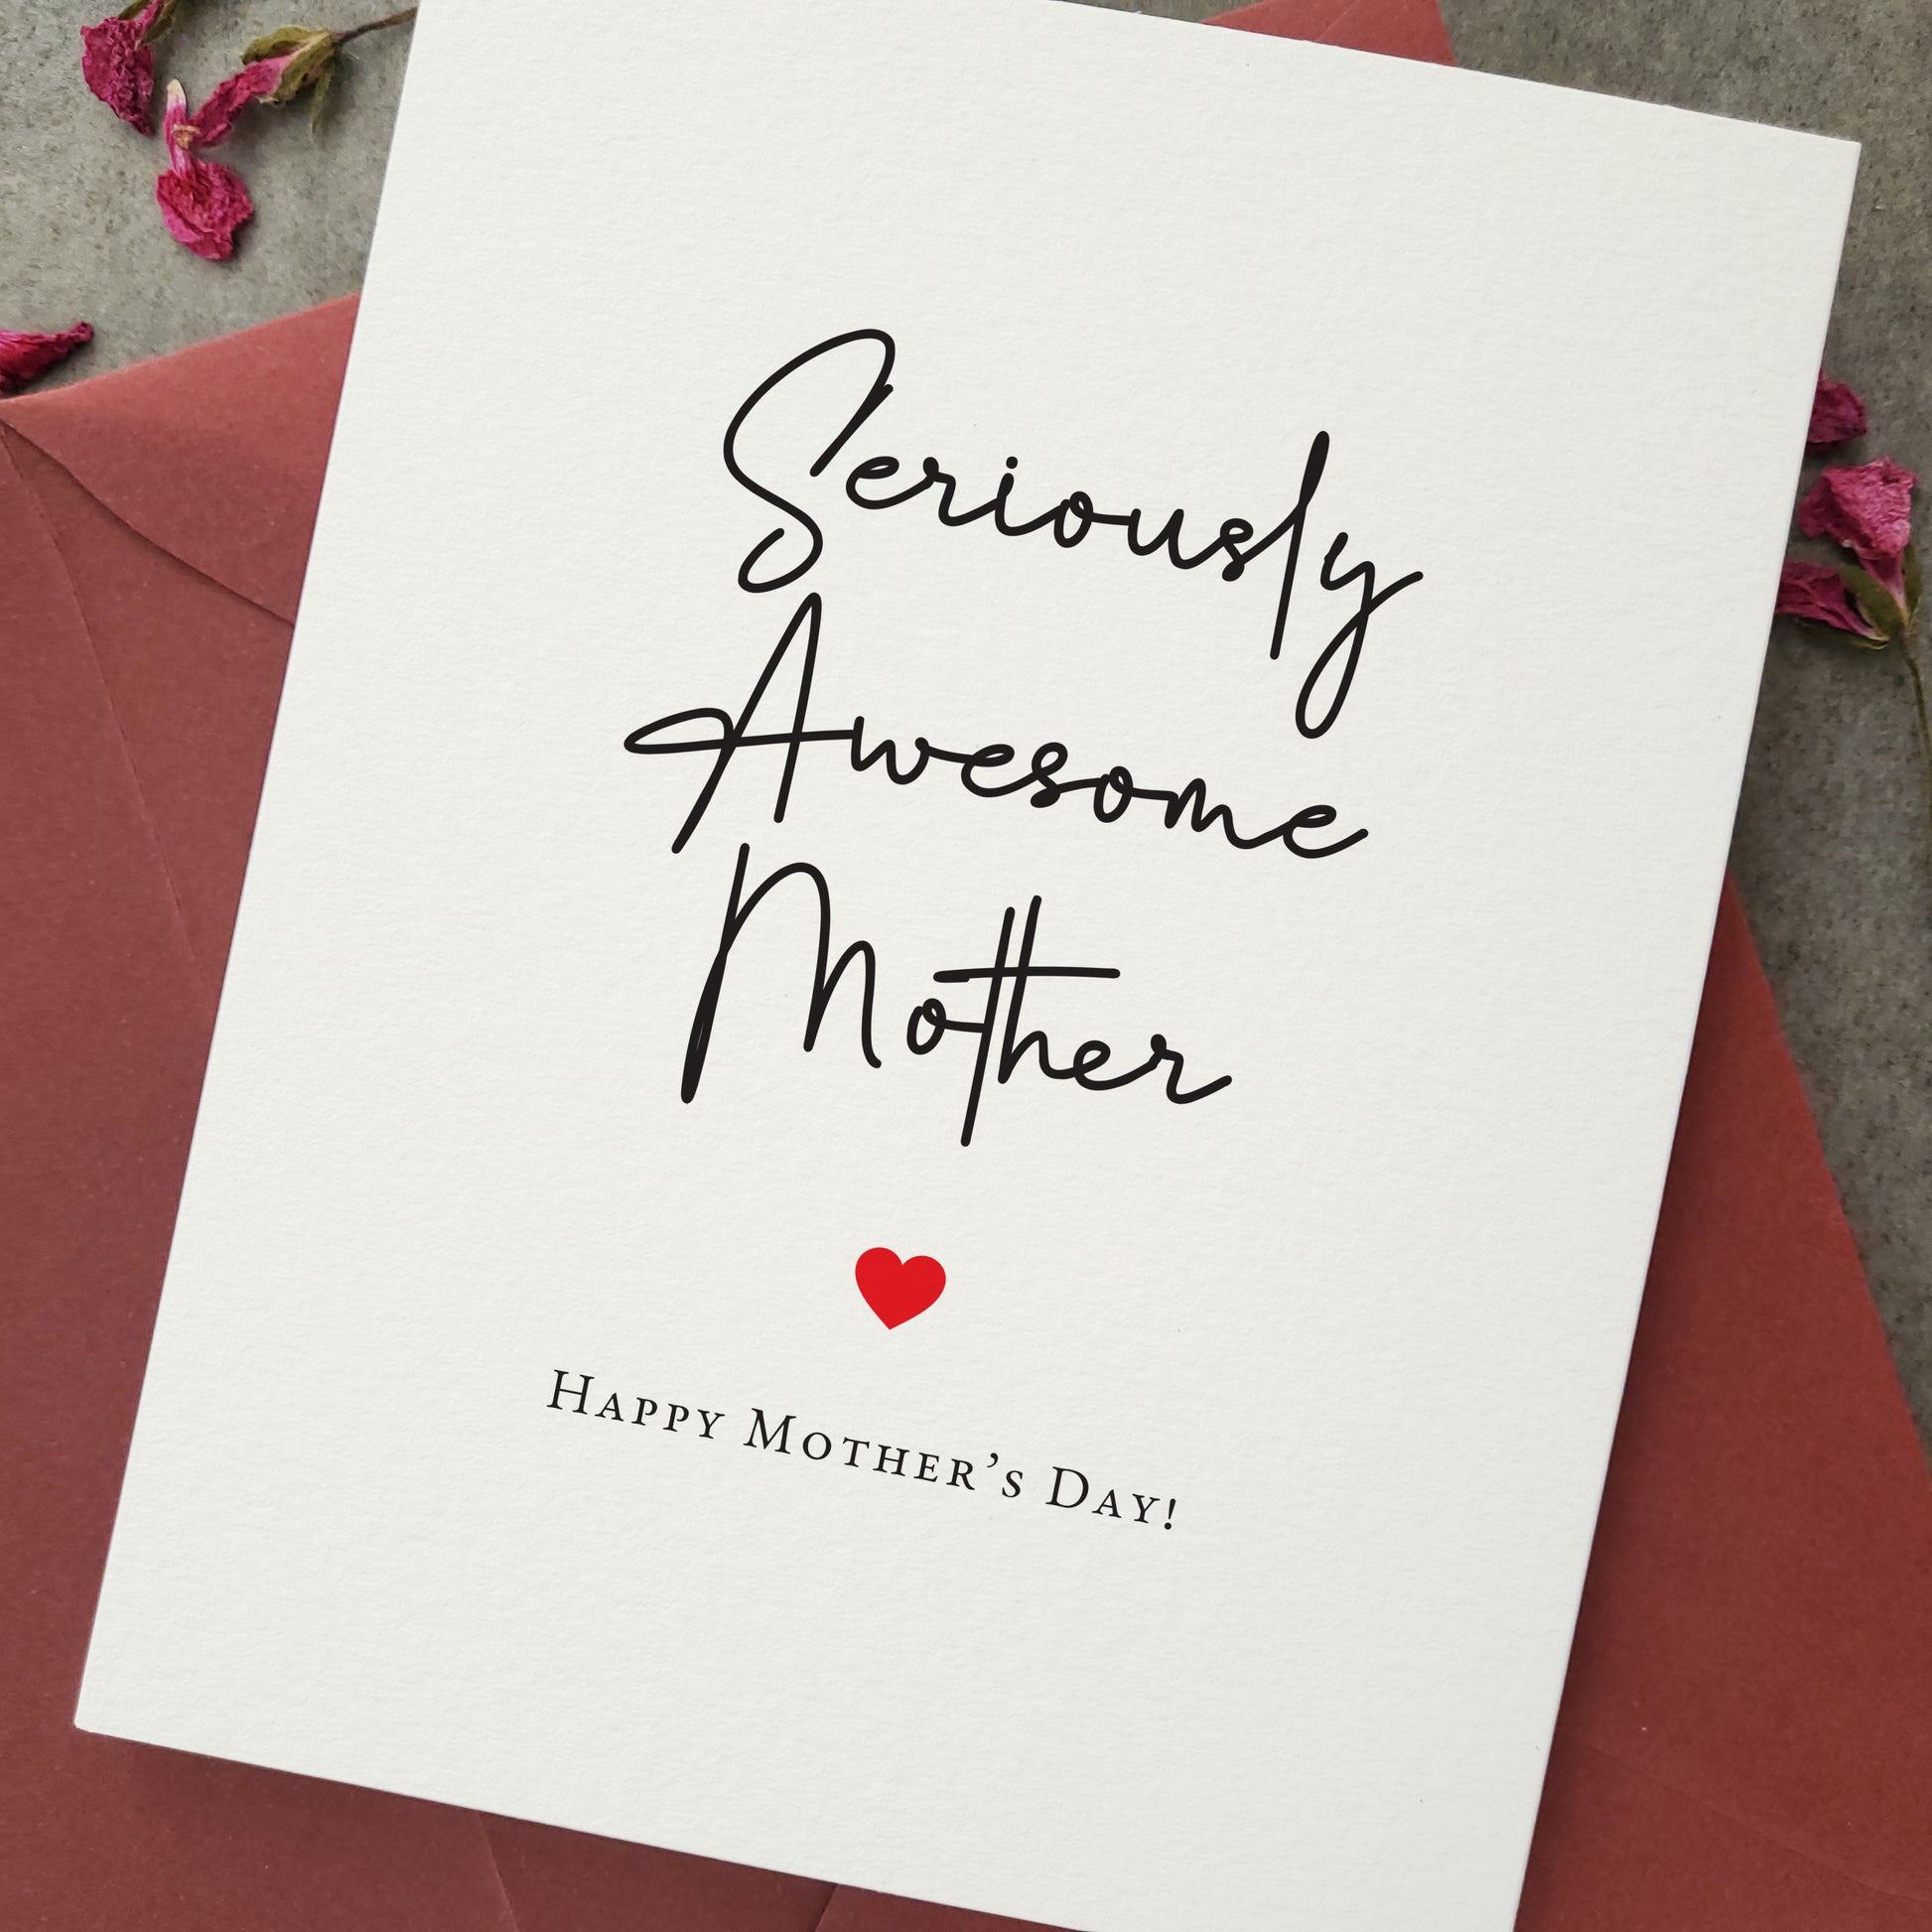 cute happy mothers day card with personalized message inside - XOXOKristen